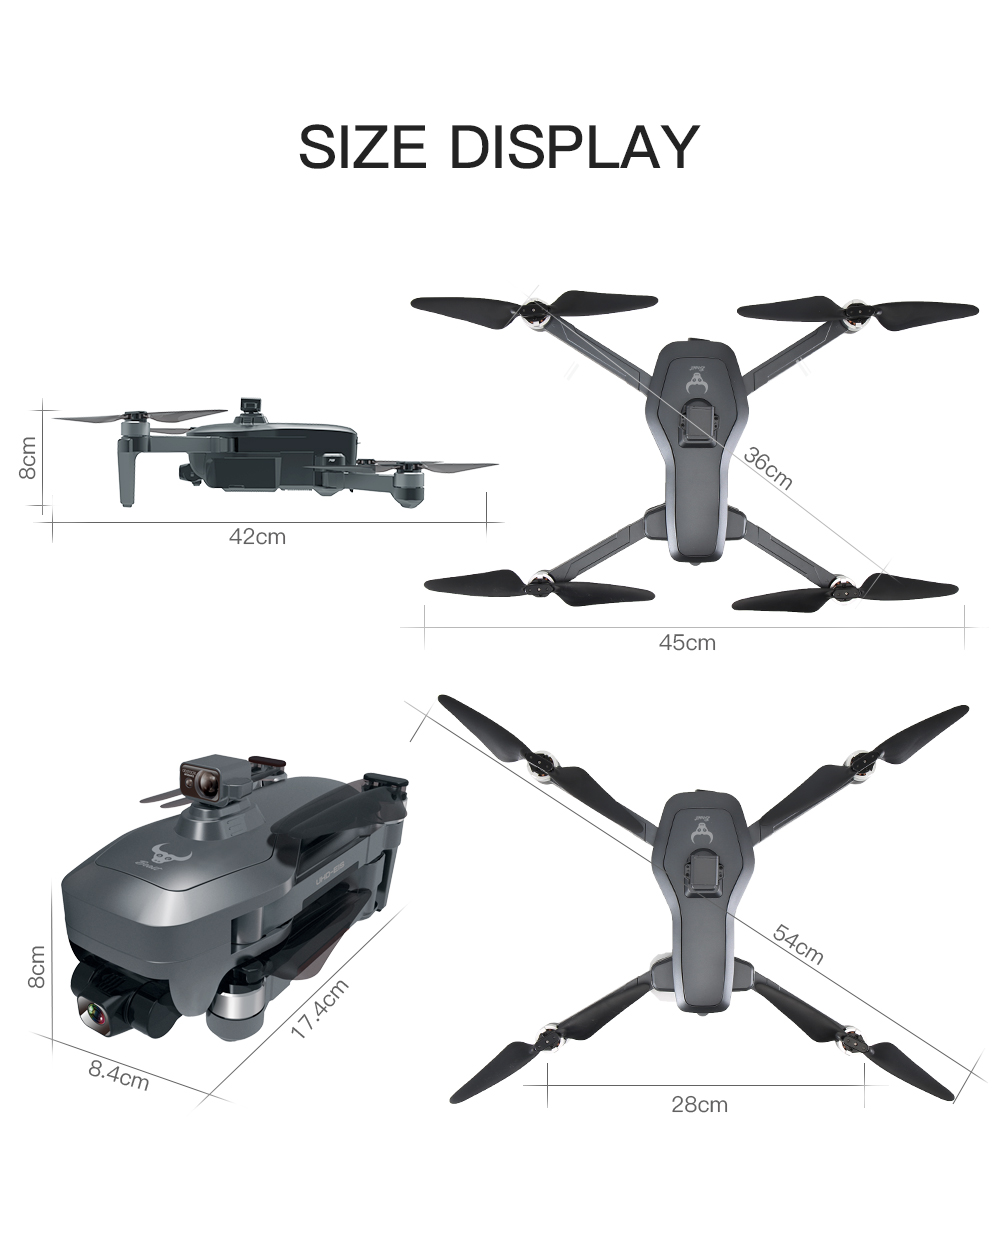 ZLL SG906 MAX GPS 5G WIFI FPV With 4K HD Camera 3-Axis EIS Anti-shake Gimbal Obstacle Avoidance Brushless Foldable RC Drone Quadcopter RTF 24